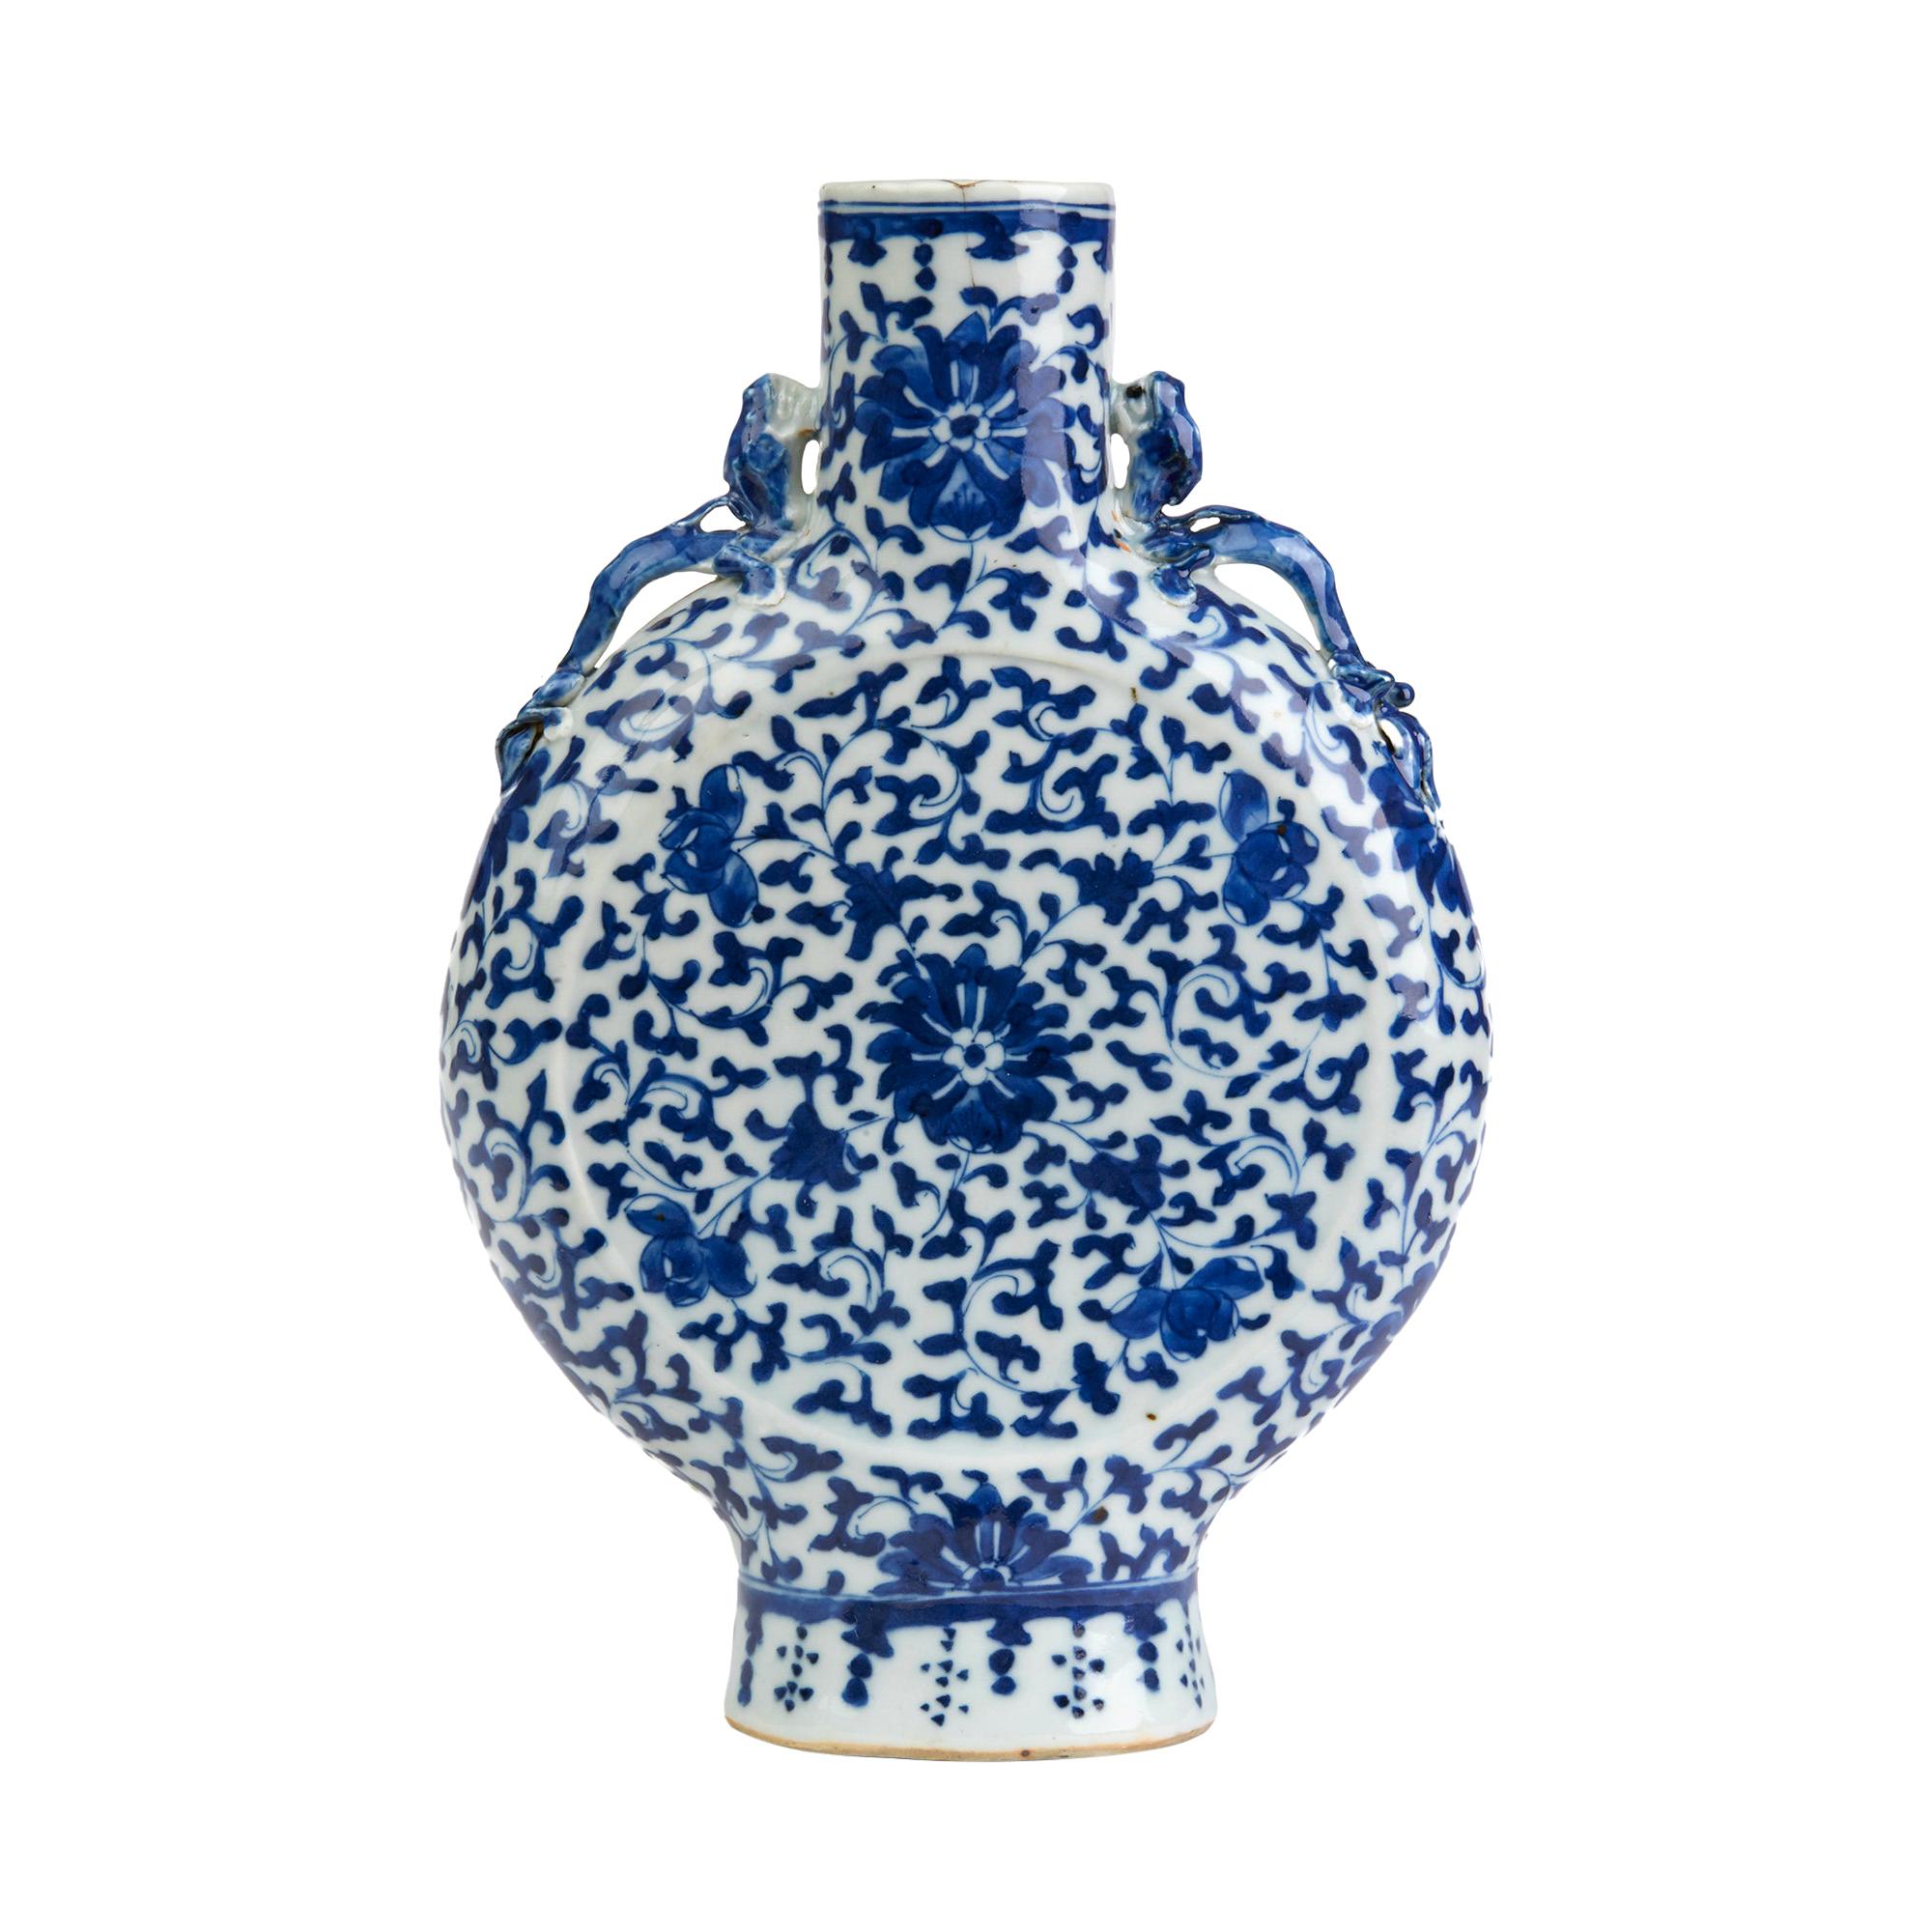 Chinese Qing Dynasty Blue and White Moon Shaped Porcelain Vase, 19th Century